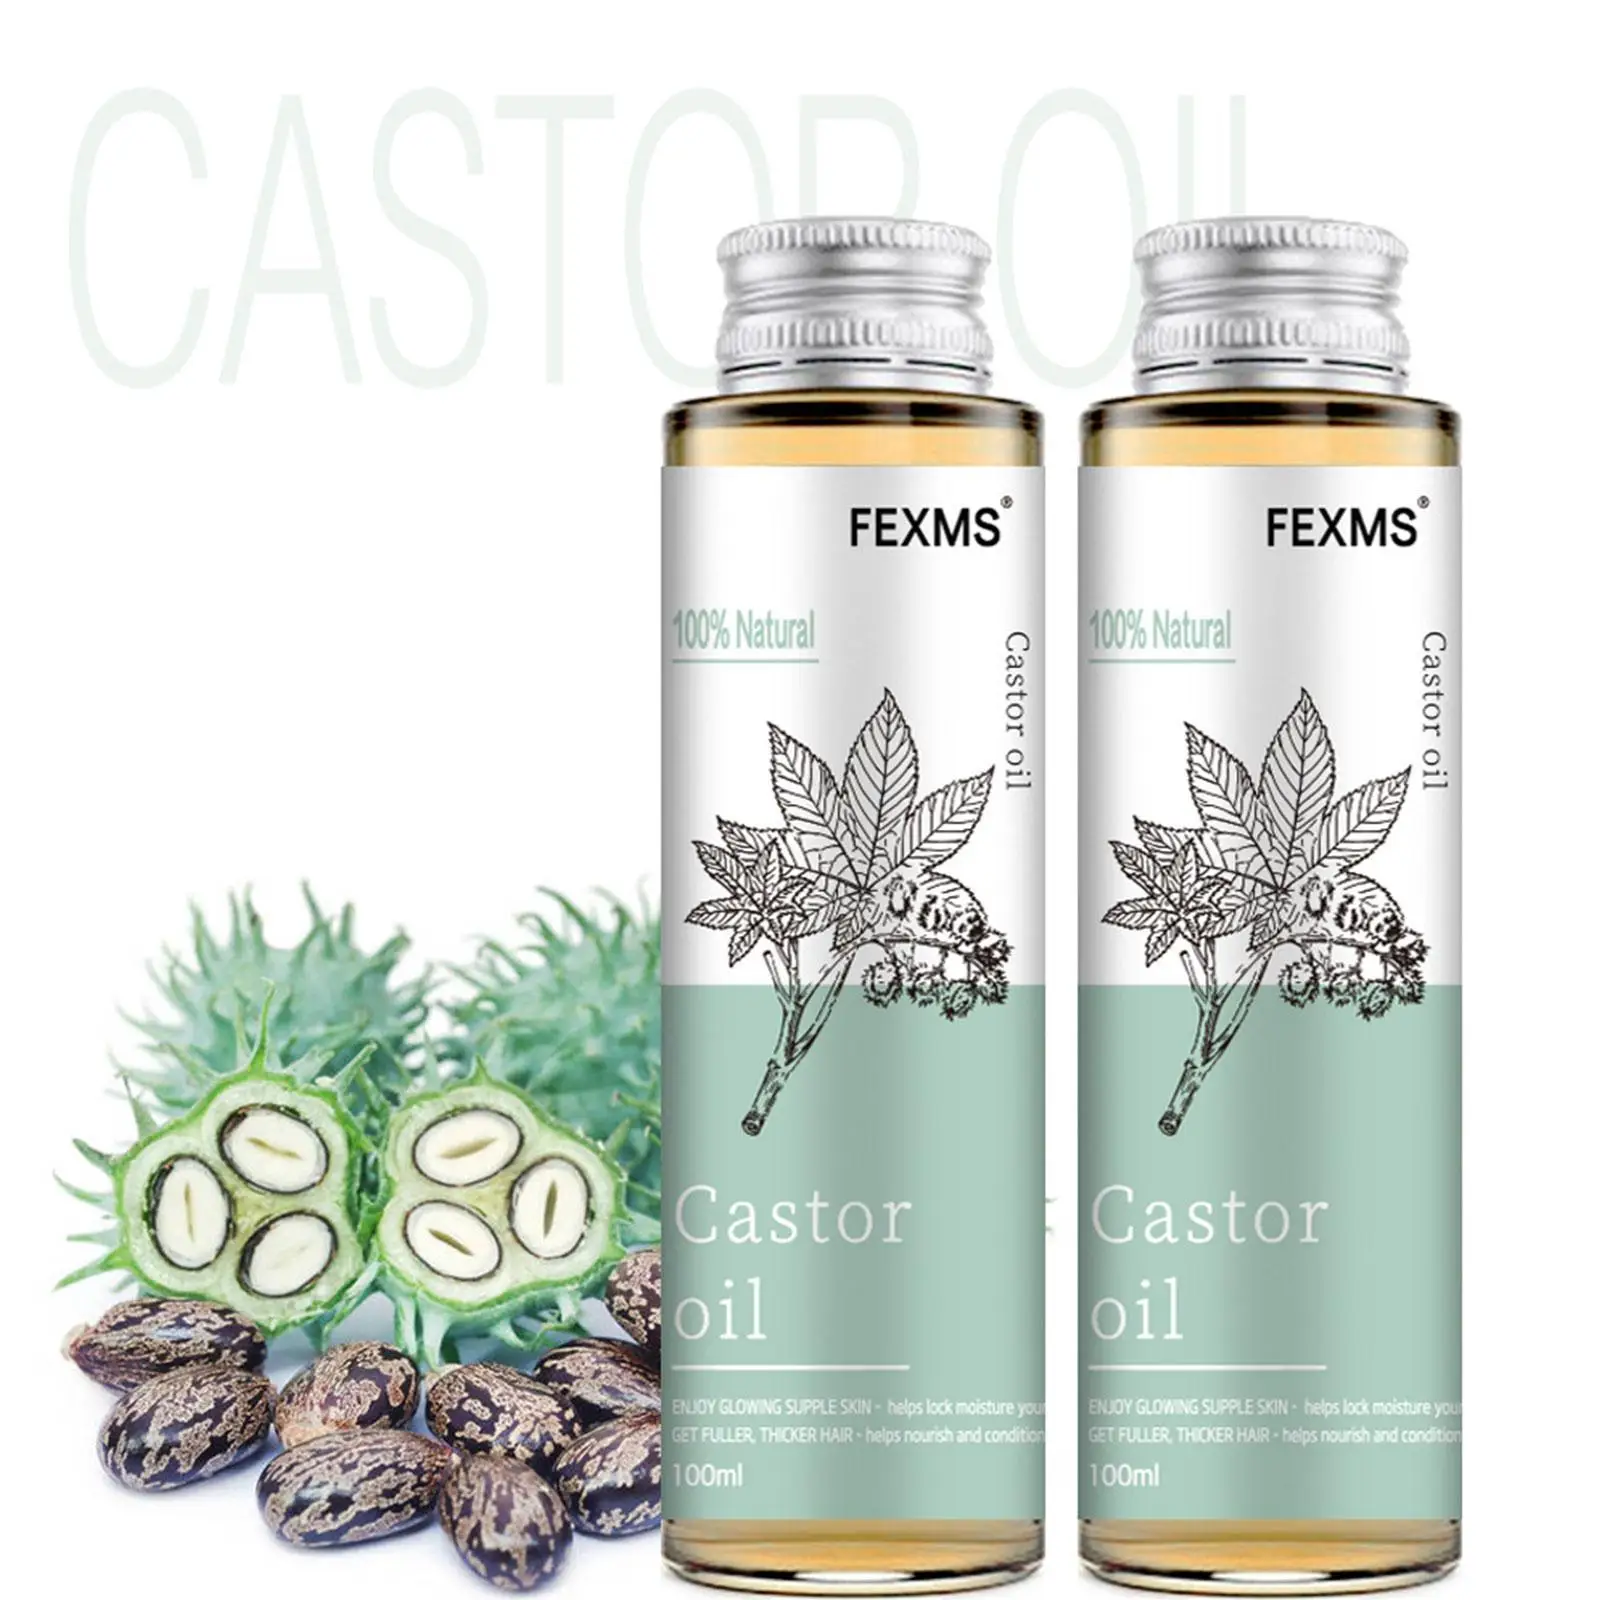 

Pure And Castor Oil For Hair Growth, Eyelashes And Eyebrows - Carrier Oil For Essential Oils, Aromatherapy And Massage